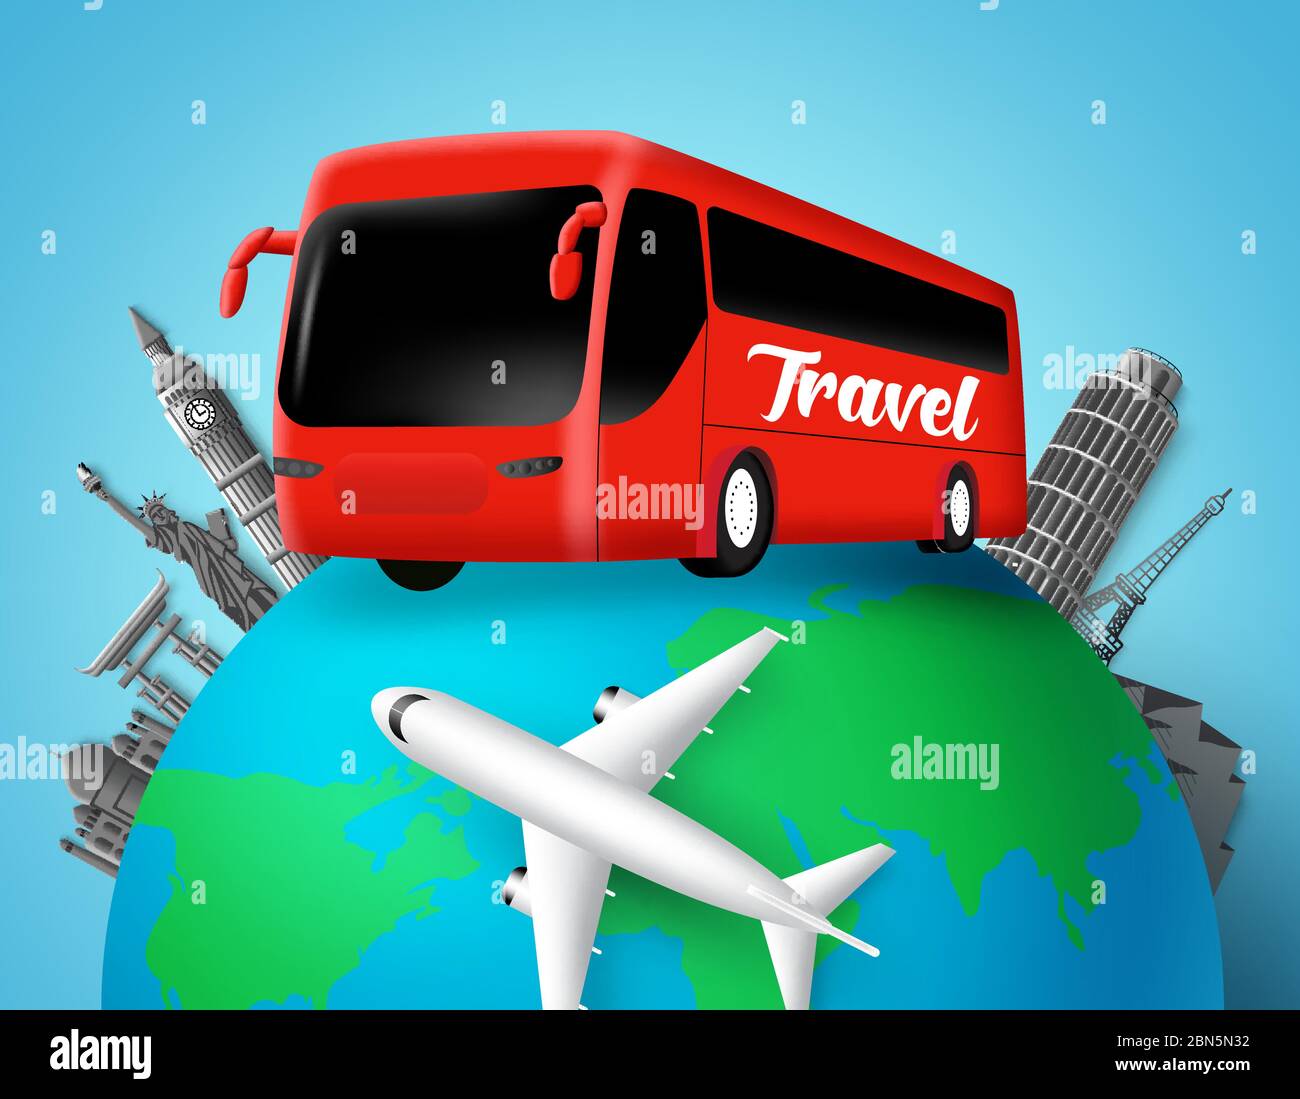 Travel bus vector design. Travel text in transportation bus with globe element and world famous country landmarks destination for world trip and tour. Stock Vector